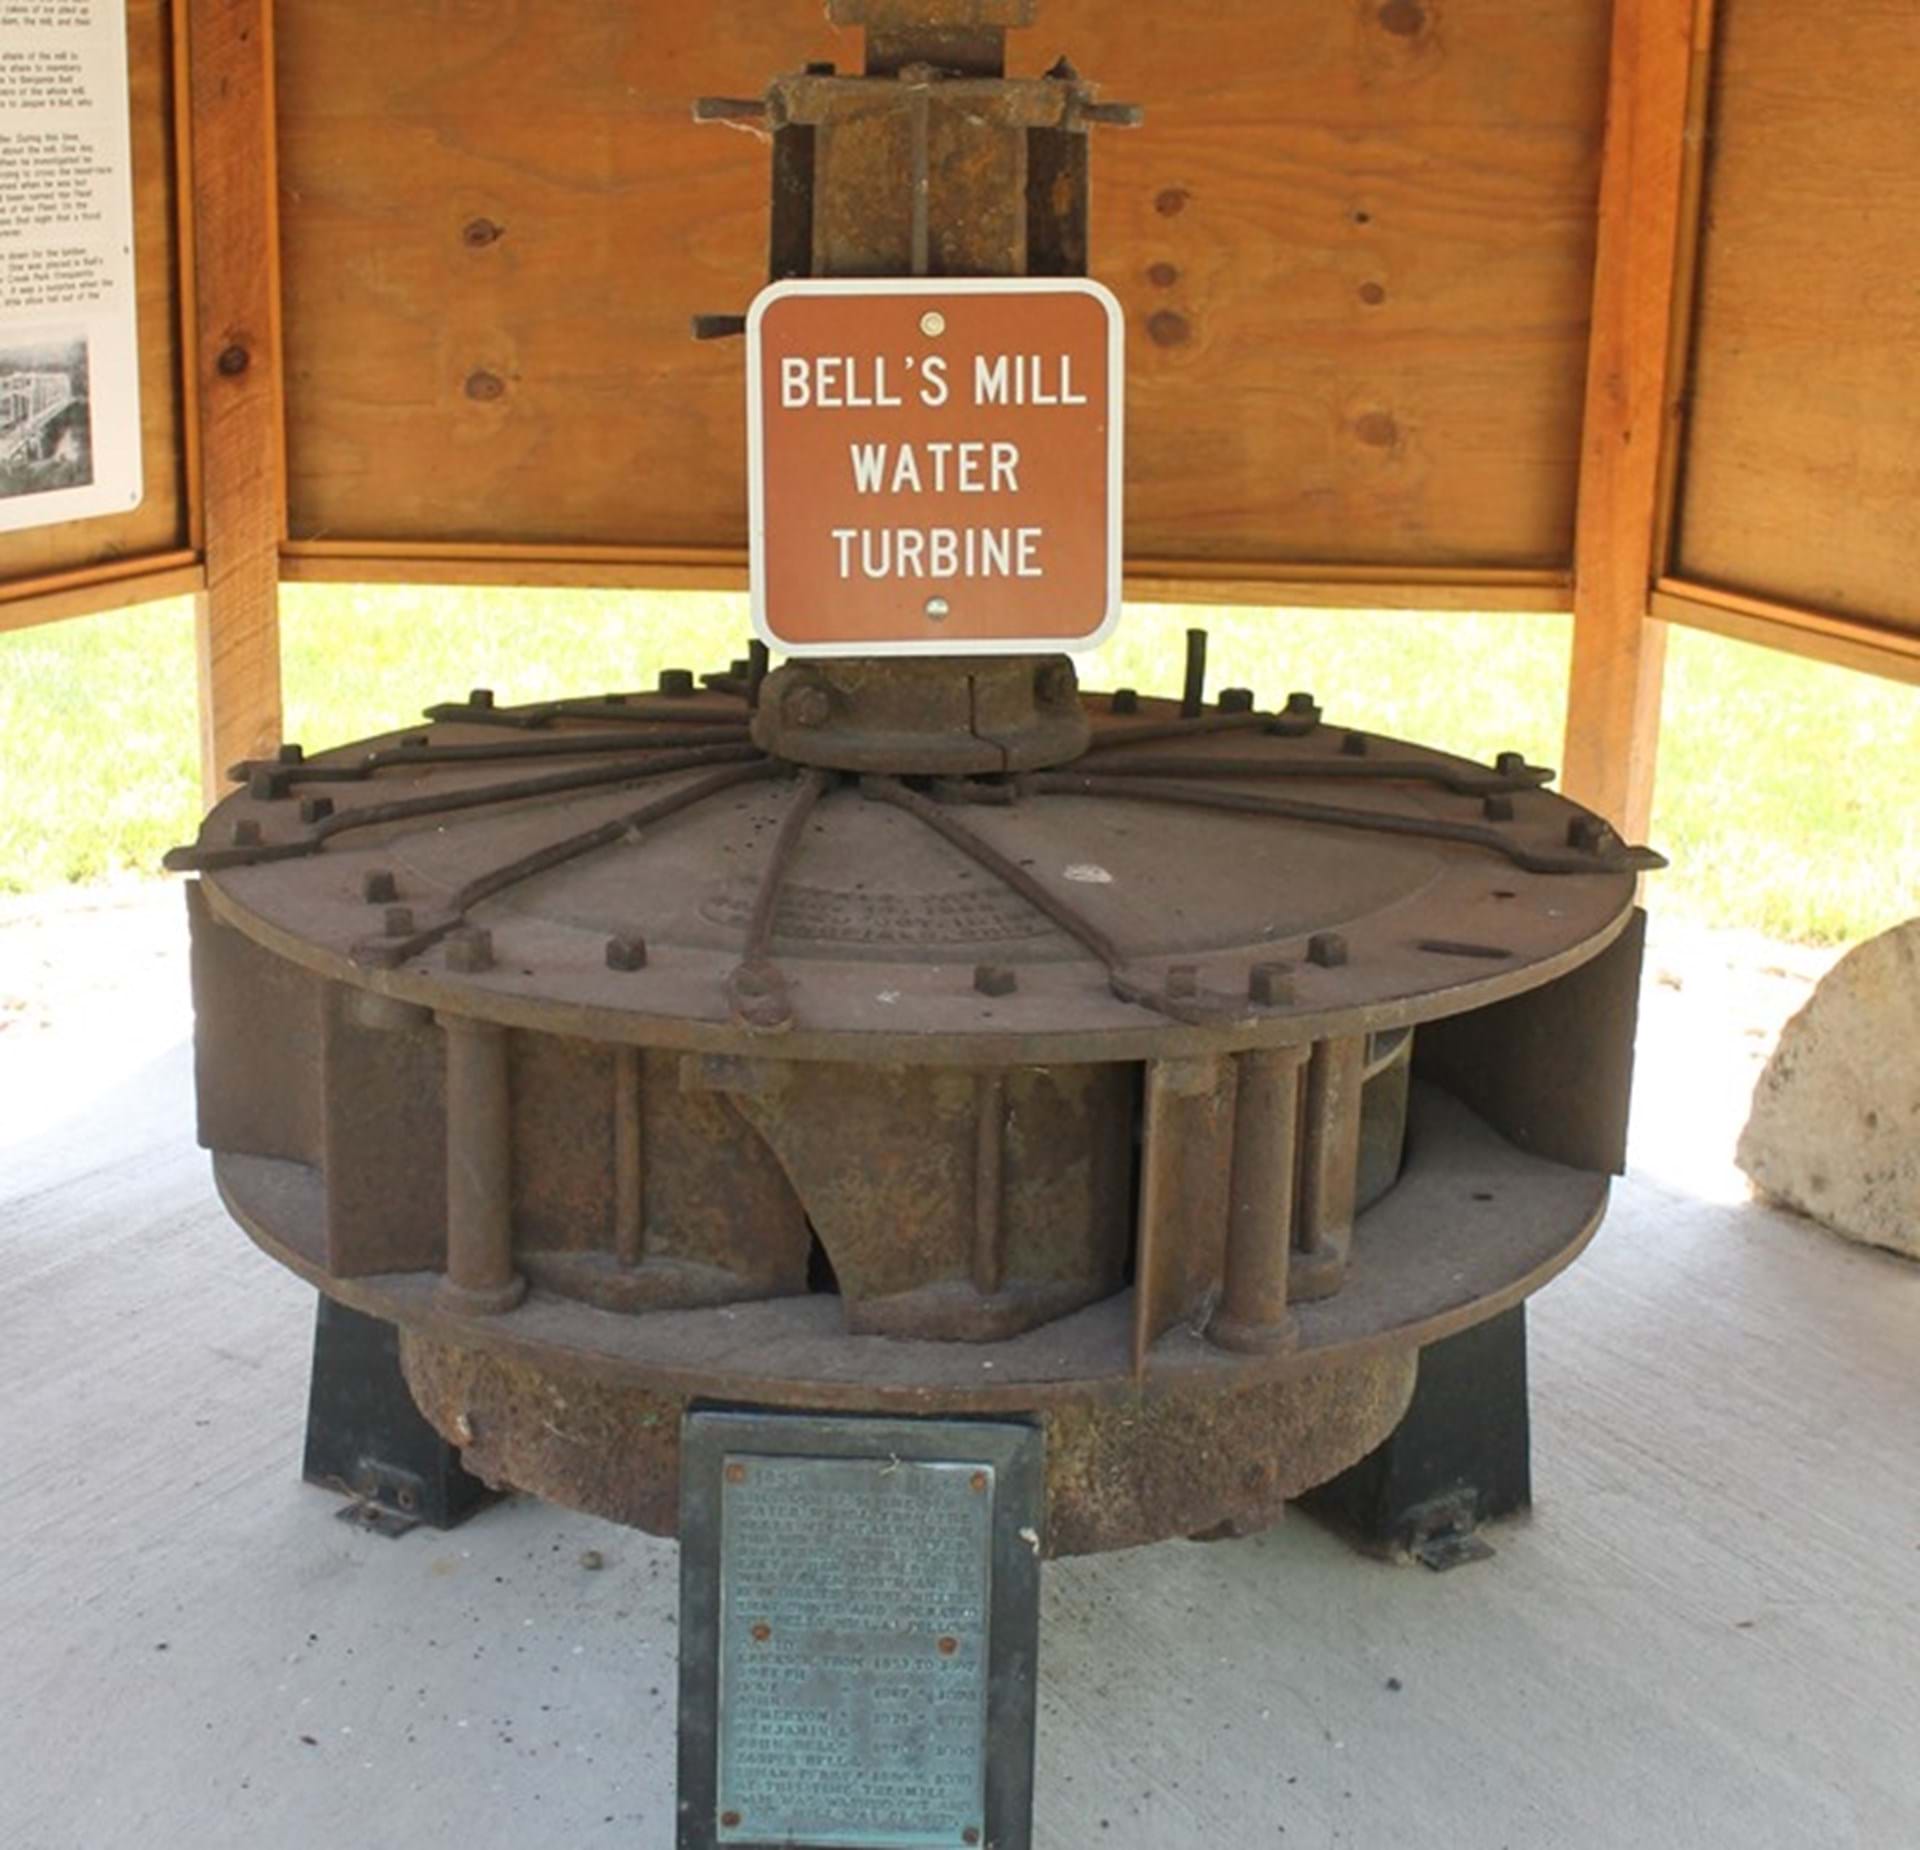 Bell's Mill